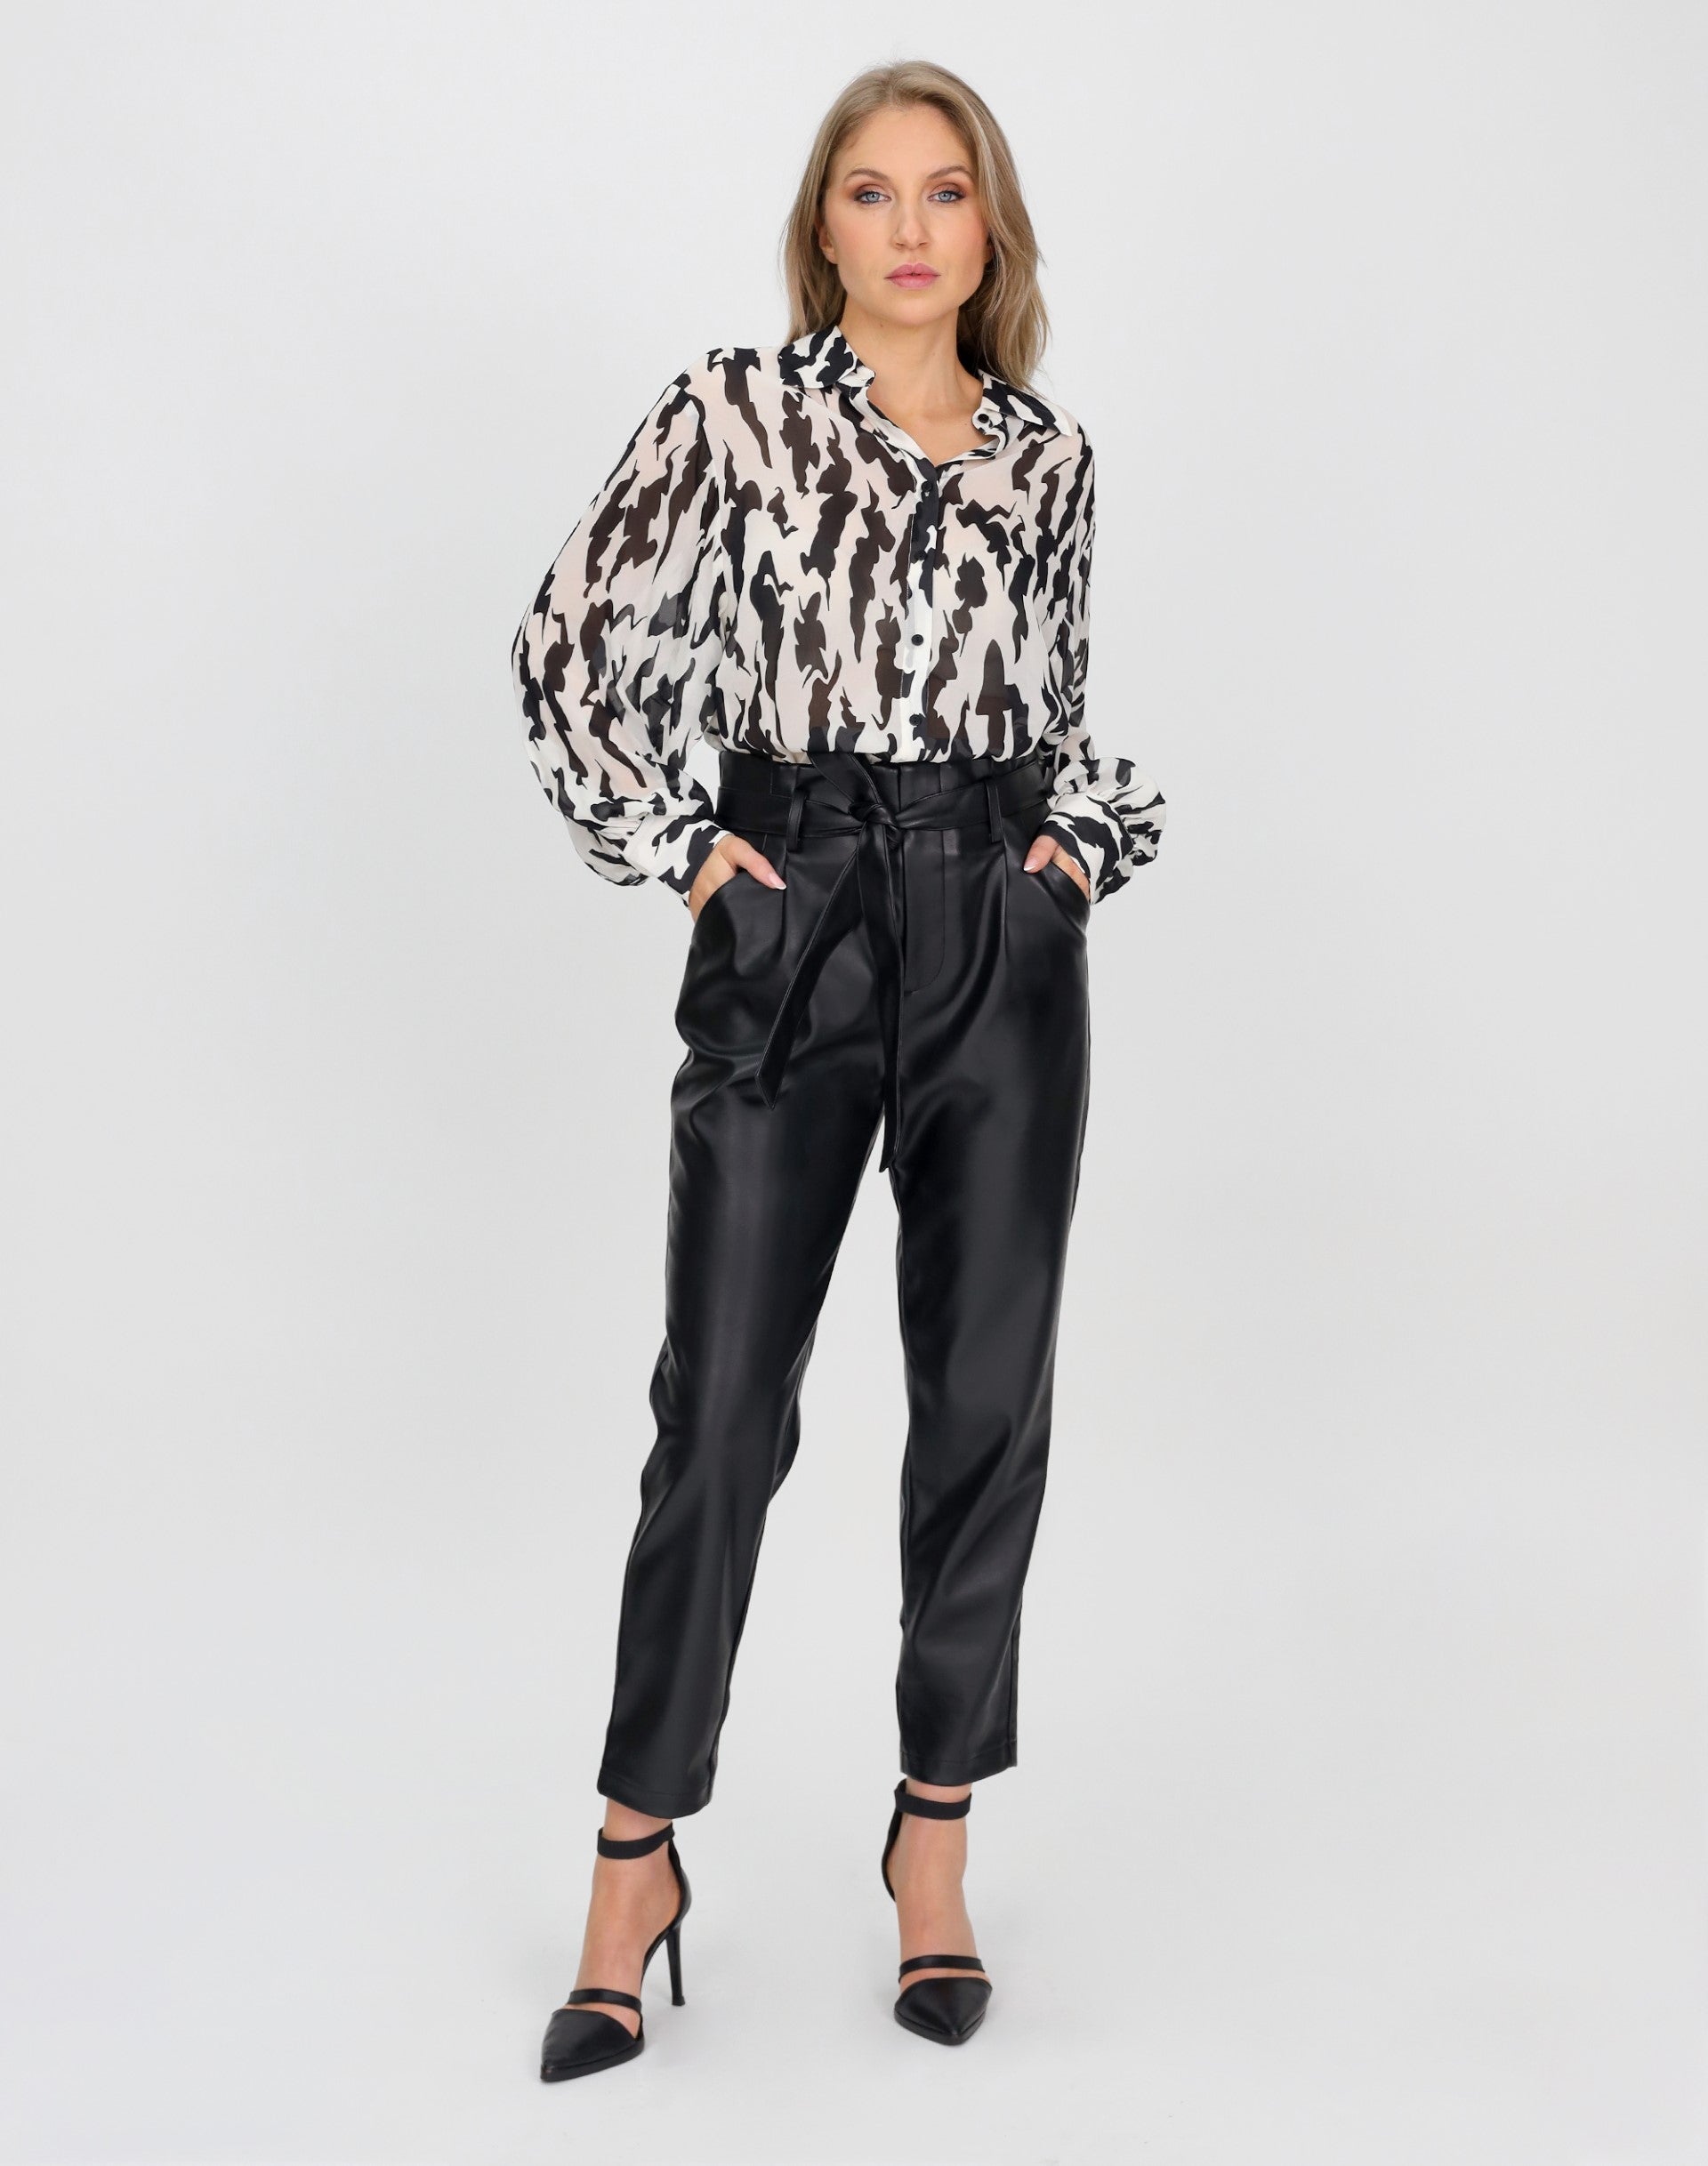 Mid Rise Leather Look Pant Black Pants Full Length Women's, 48% OFF